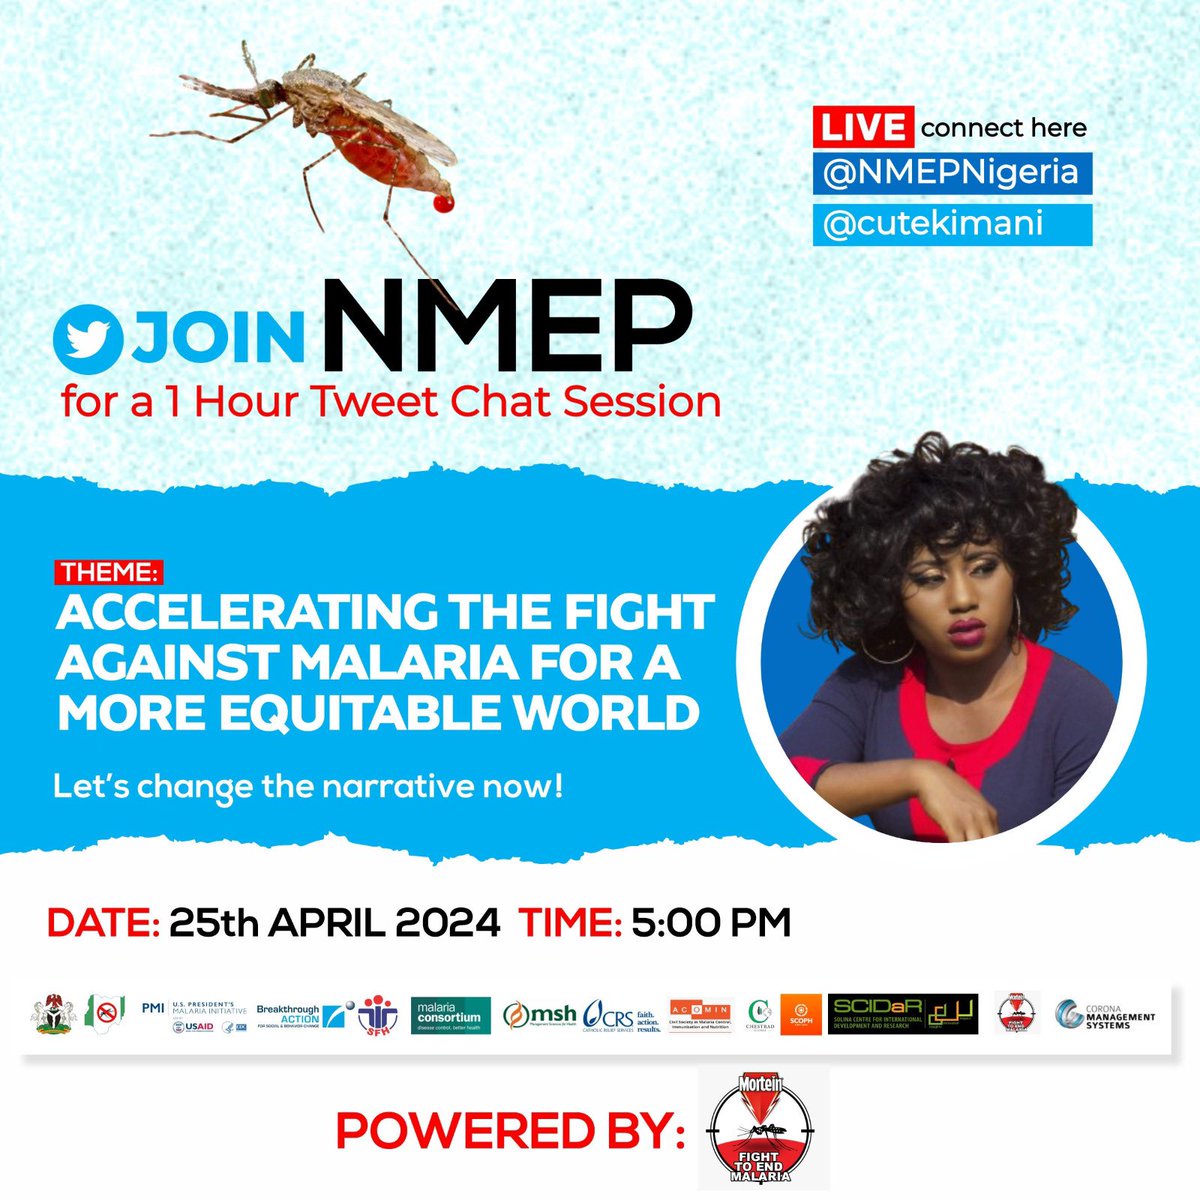 Welcome to the Tweetchat @NMEPNigeria 

Glad to have you on here.

#2024WMD #ZeroMalariaStartsWithMe
#KimaniOffAir